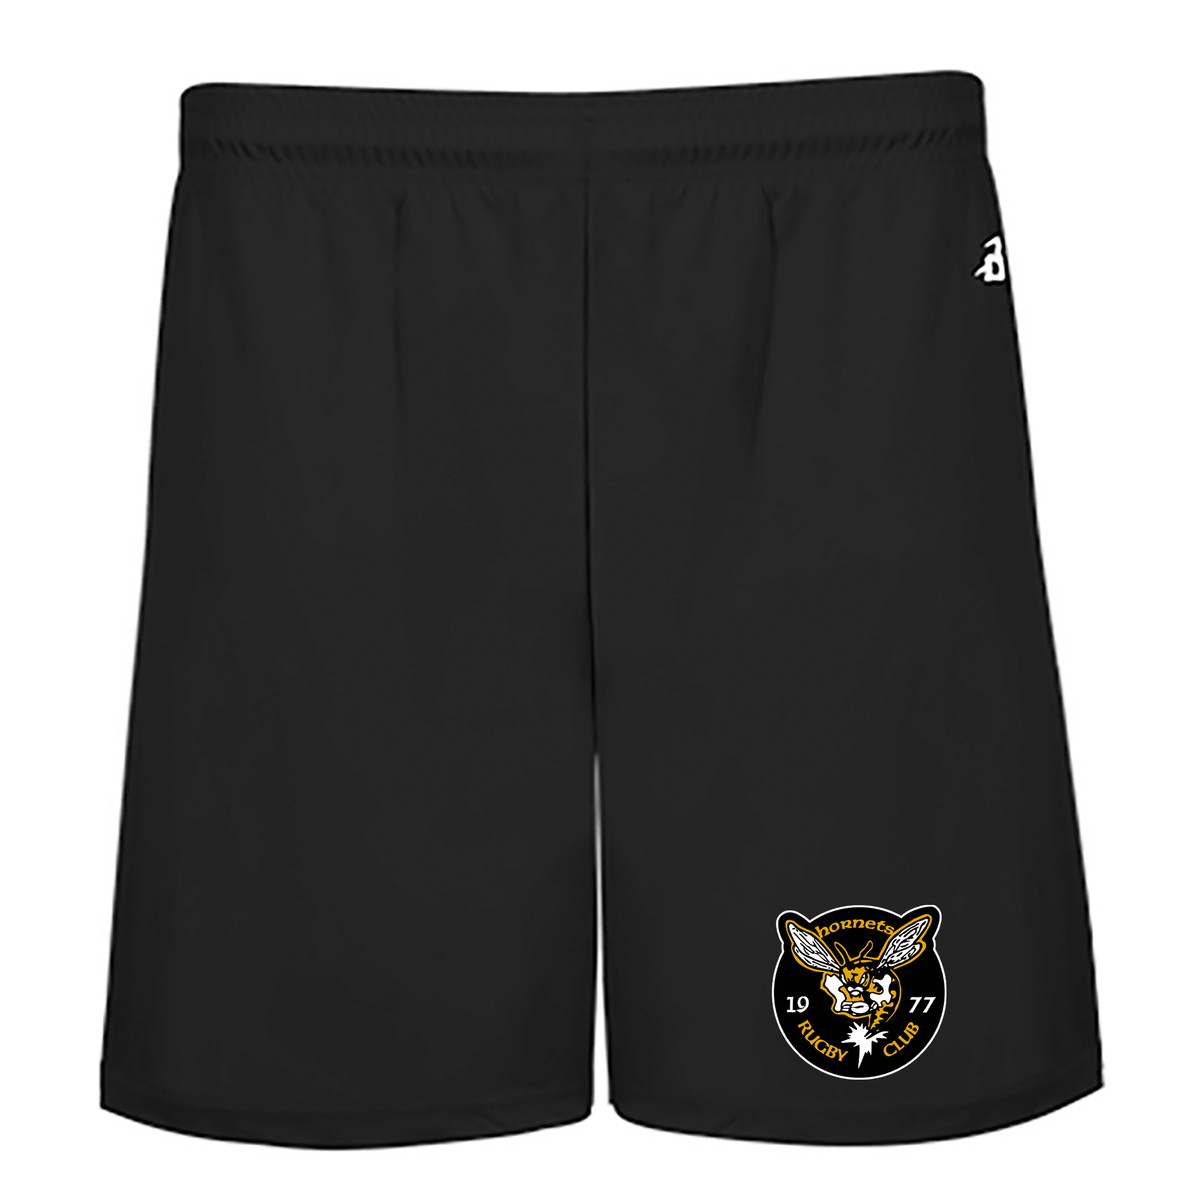 St. Louis Hornets Rugby Club B-Core 5" Short